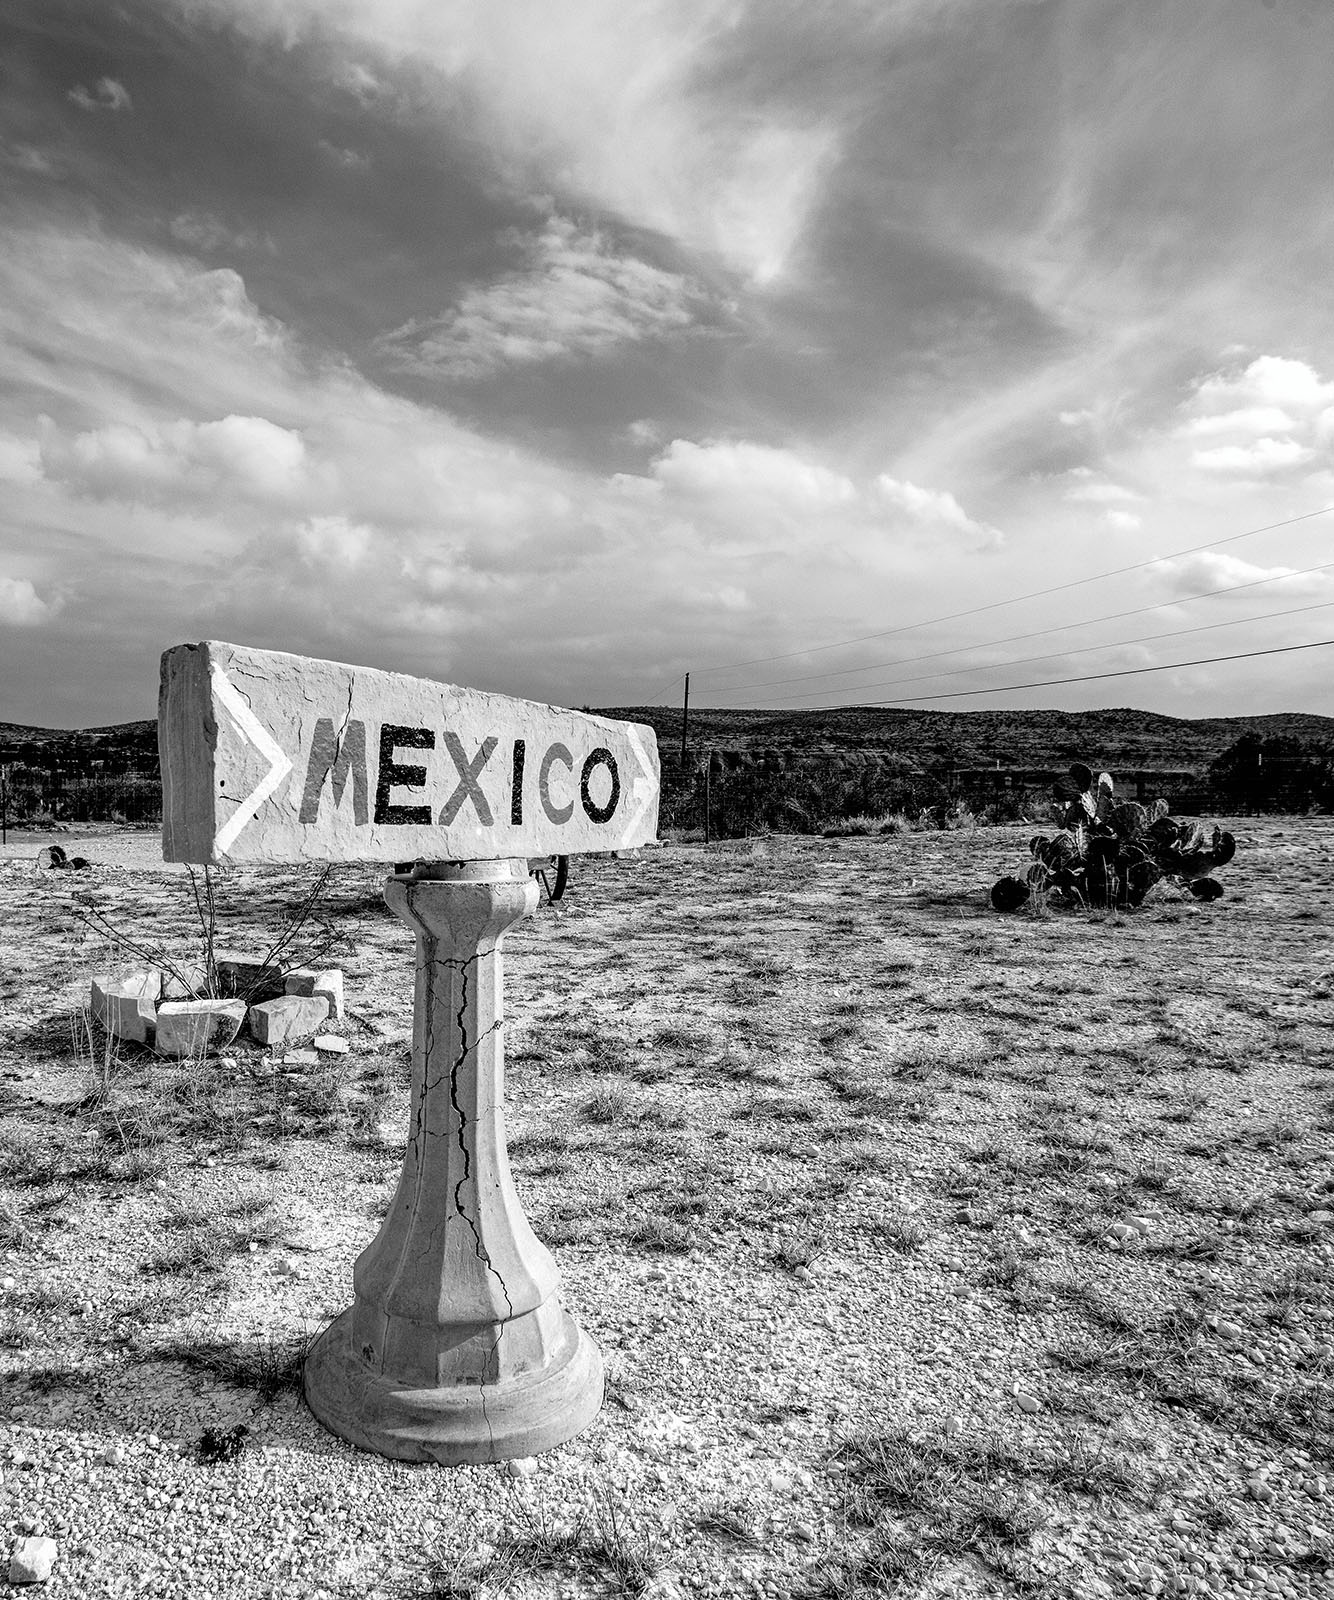 A black and white sign reading 'MEXICO' on a desert landscape